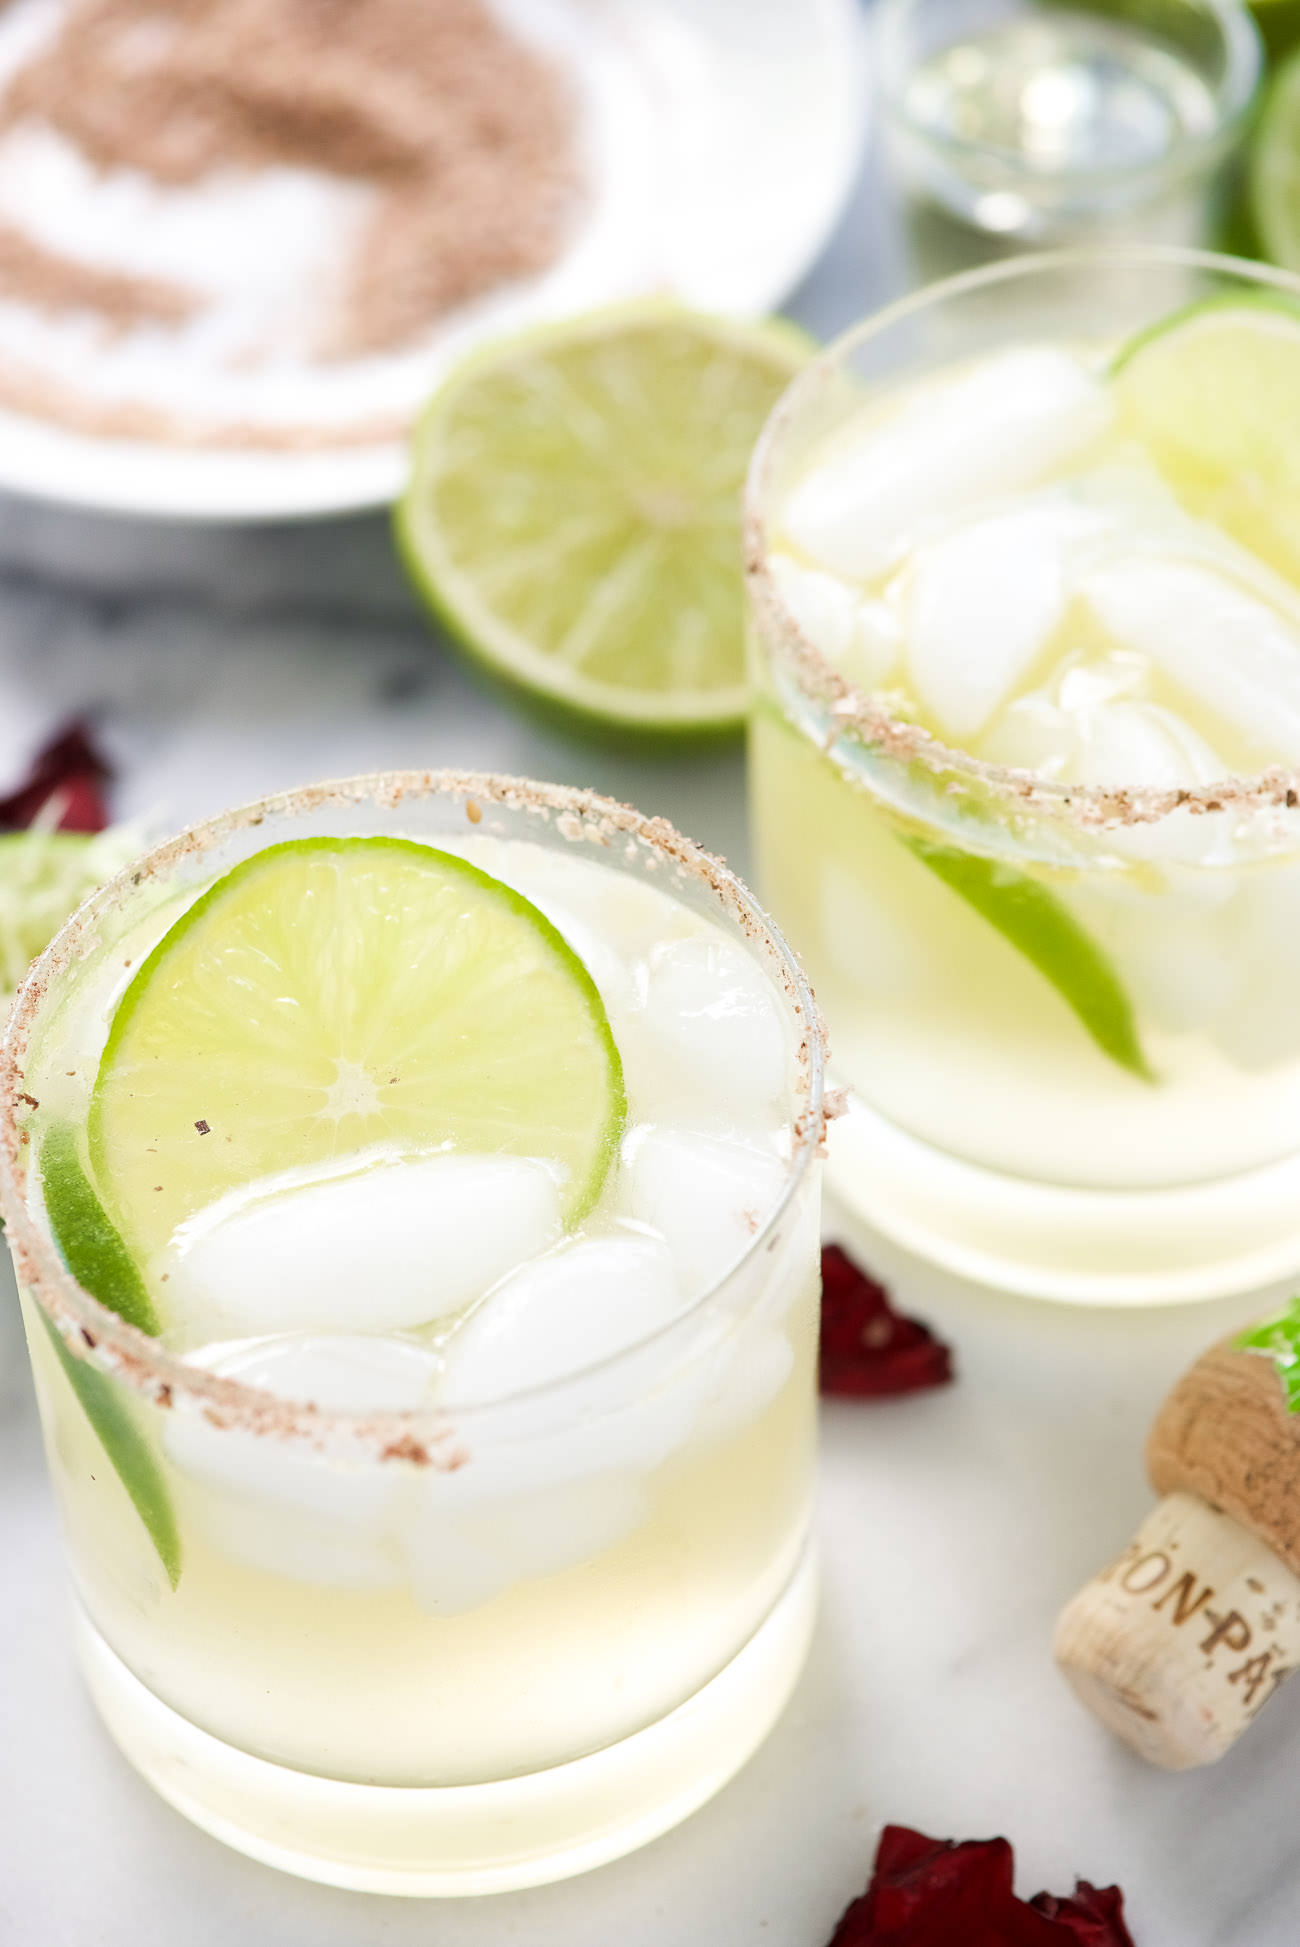 This is the best Spicy Margarita recipe out there! Starts with a base of fresh lime juice, silver tequila and agave then spiced with a bit of jalapeño for a refreshing cocktail!